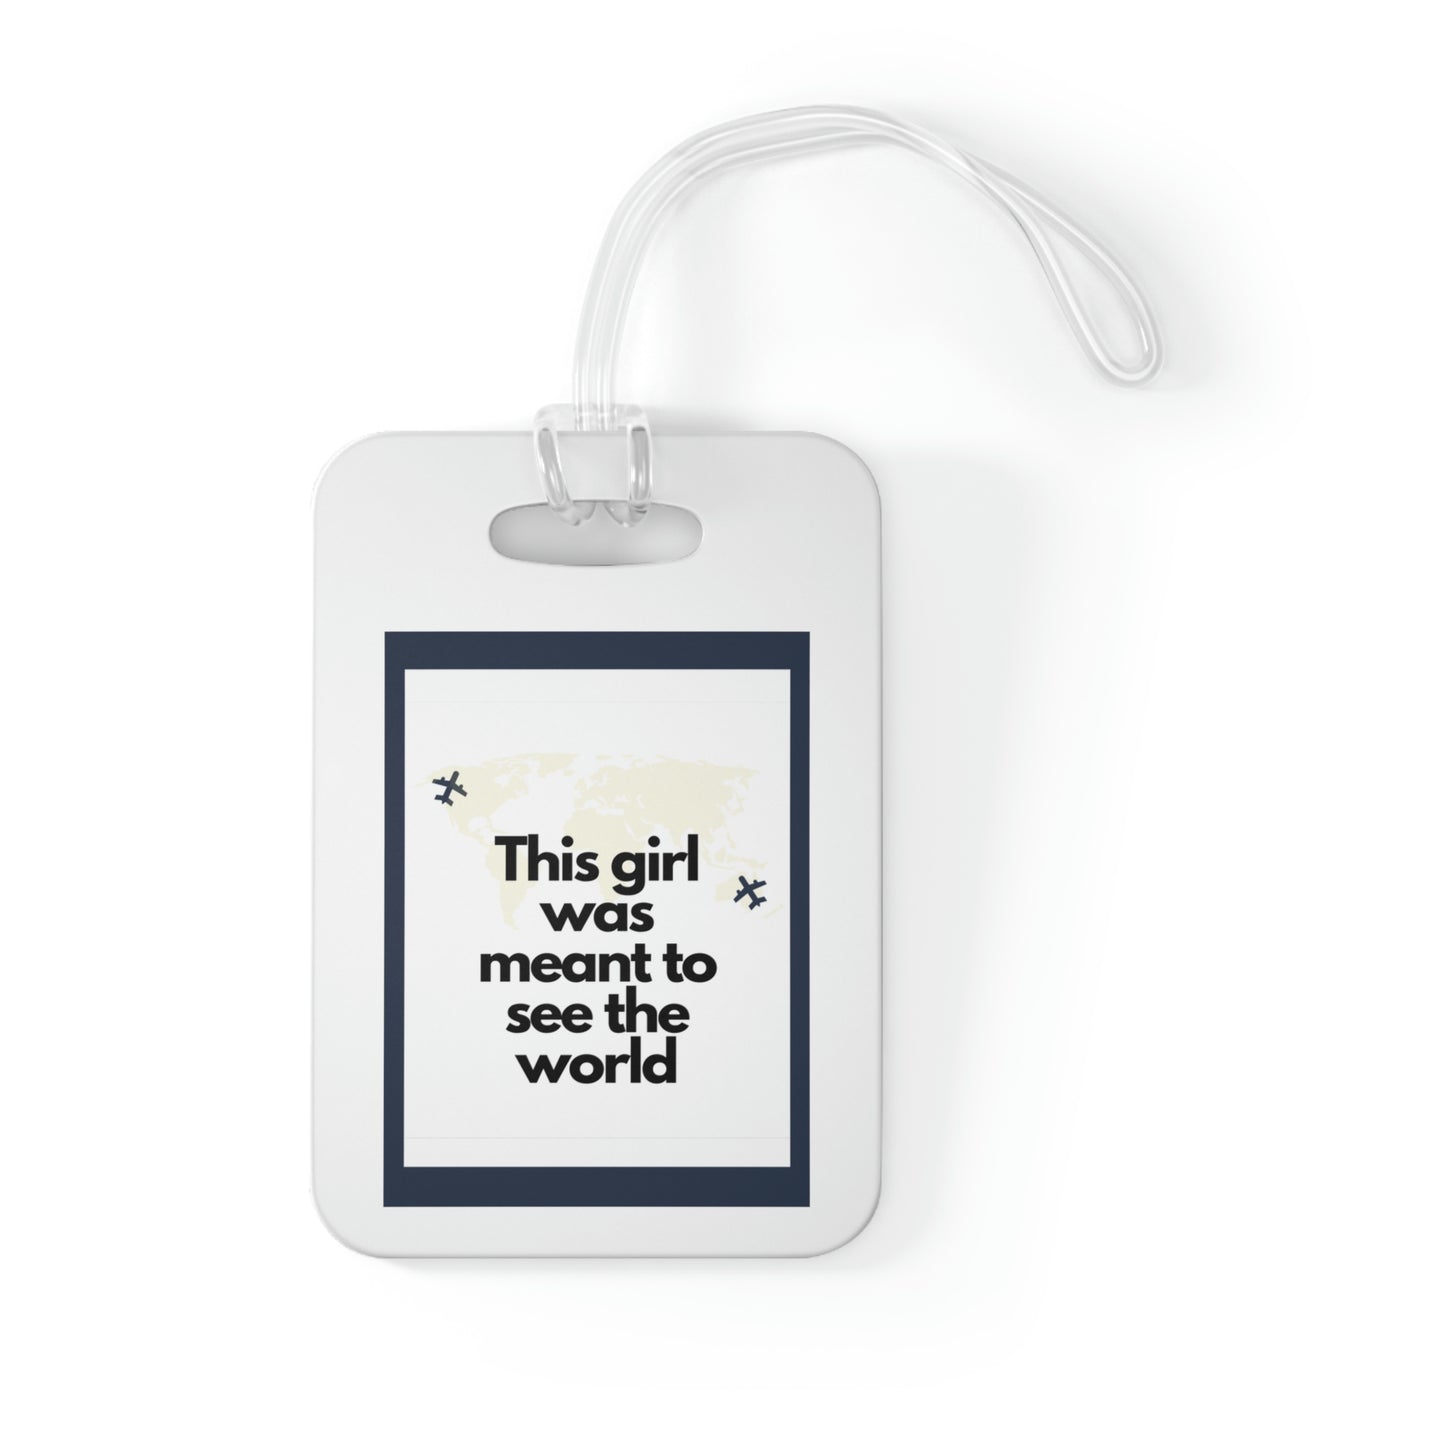 This girl was meant to see the world suitcase luggage Bag Tag